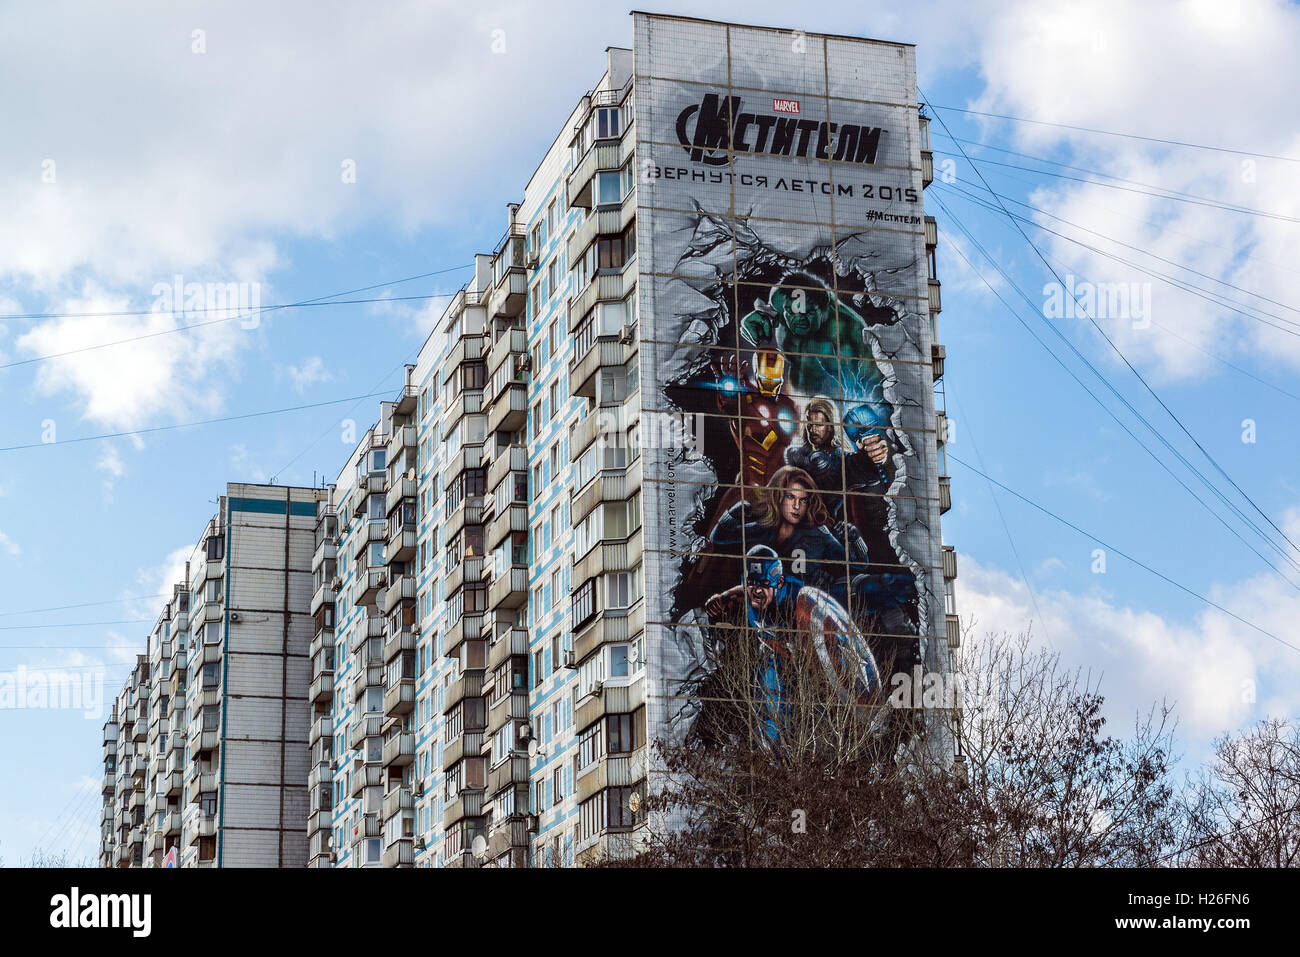 Moscow, Russia - April 04.2016. Advertising Avengers from Marvel comics on  facade of  residential building Stock Photo